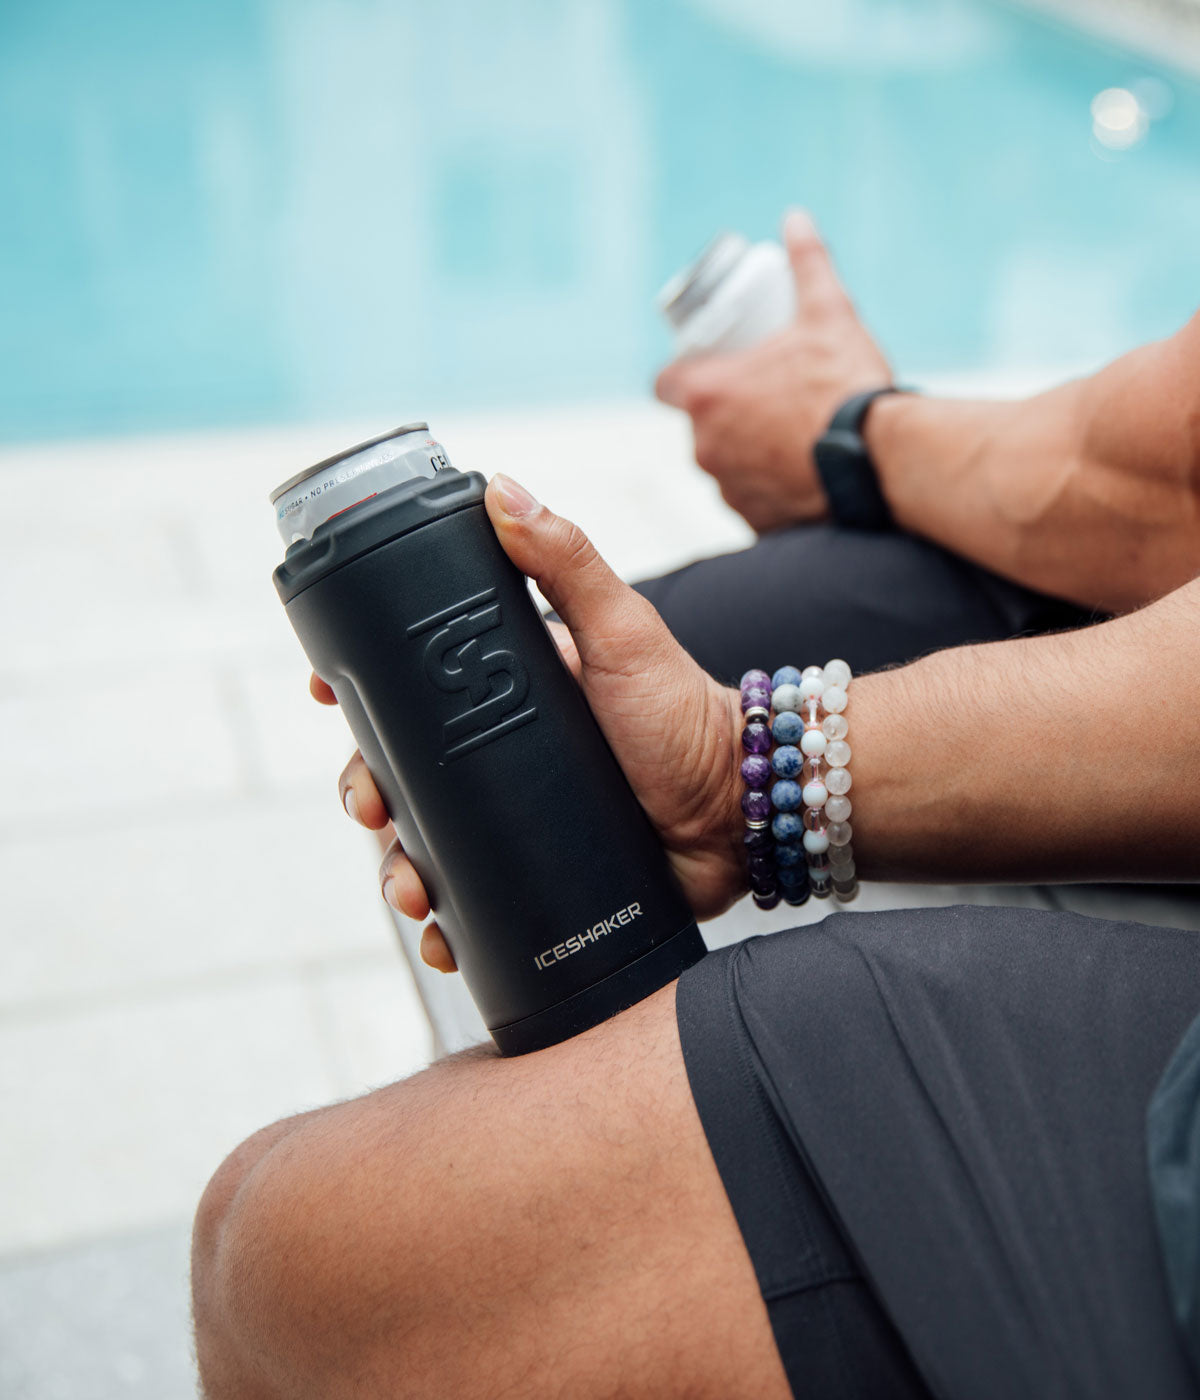 An close up image of the Black 12oz Canpanion being held by a males hand. There is a pool in the background and another man's hand holding a White 12oz Canpanion.